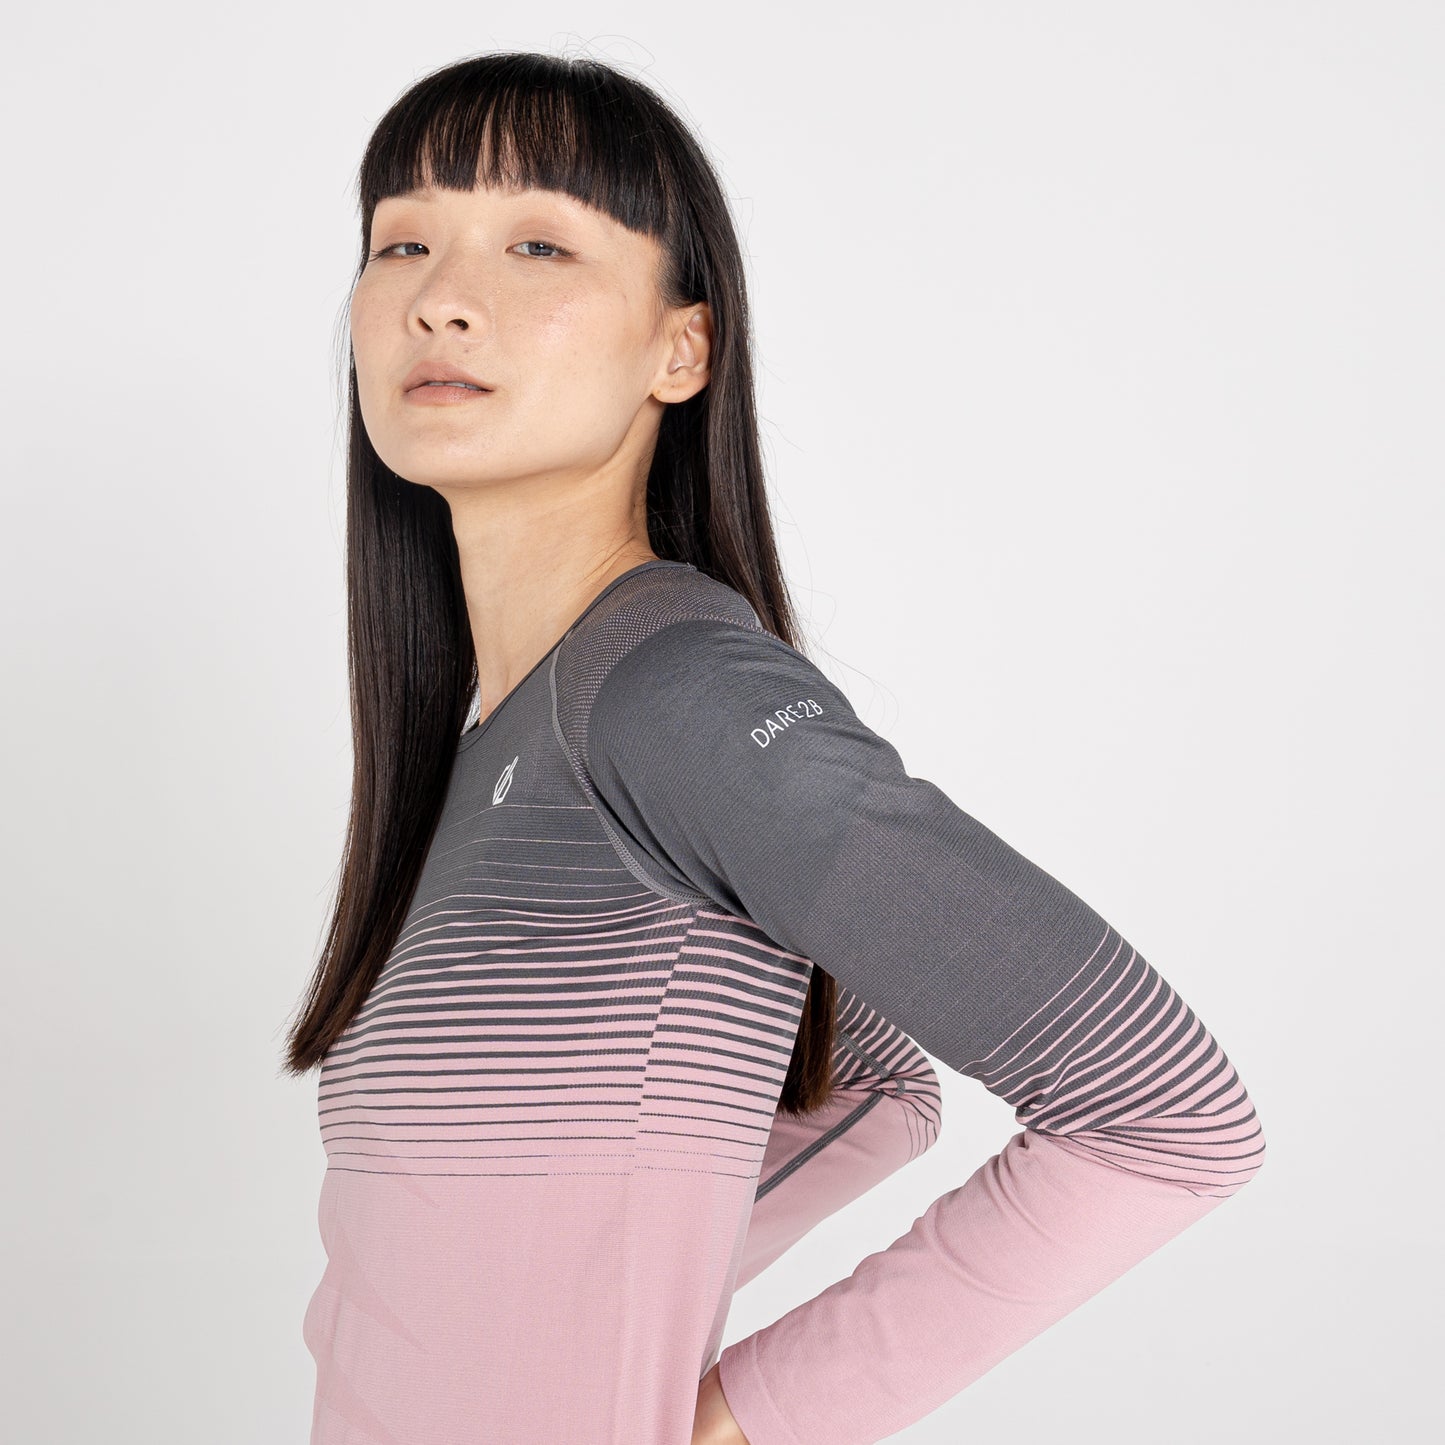 Women's In The Zone Performance Base Layer Set | Powder Pink Grey